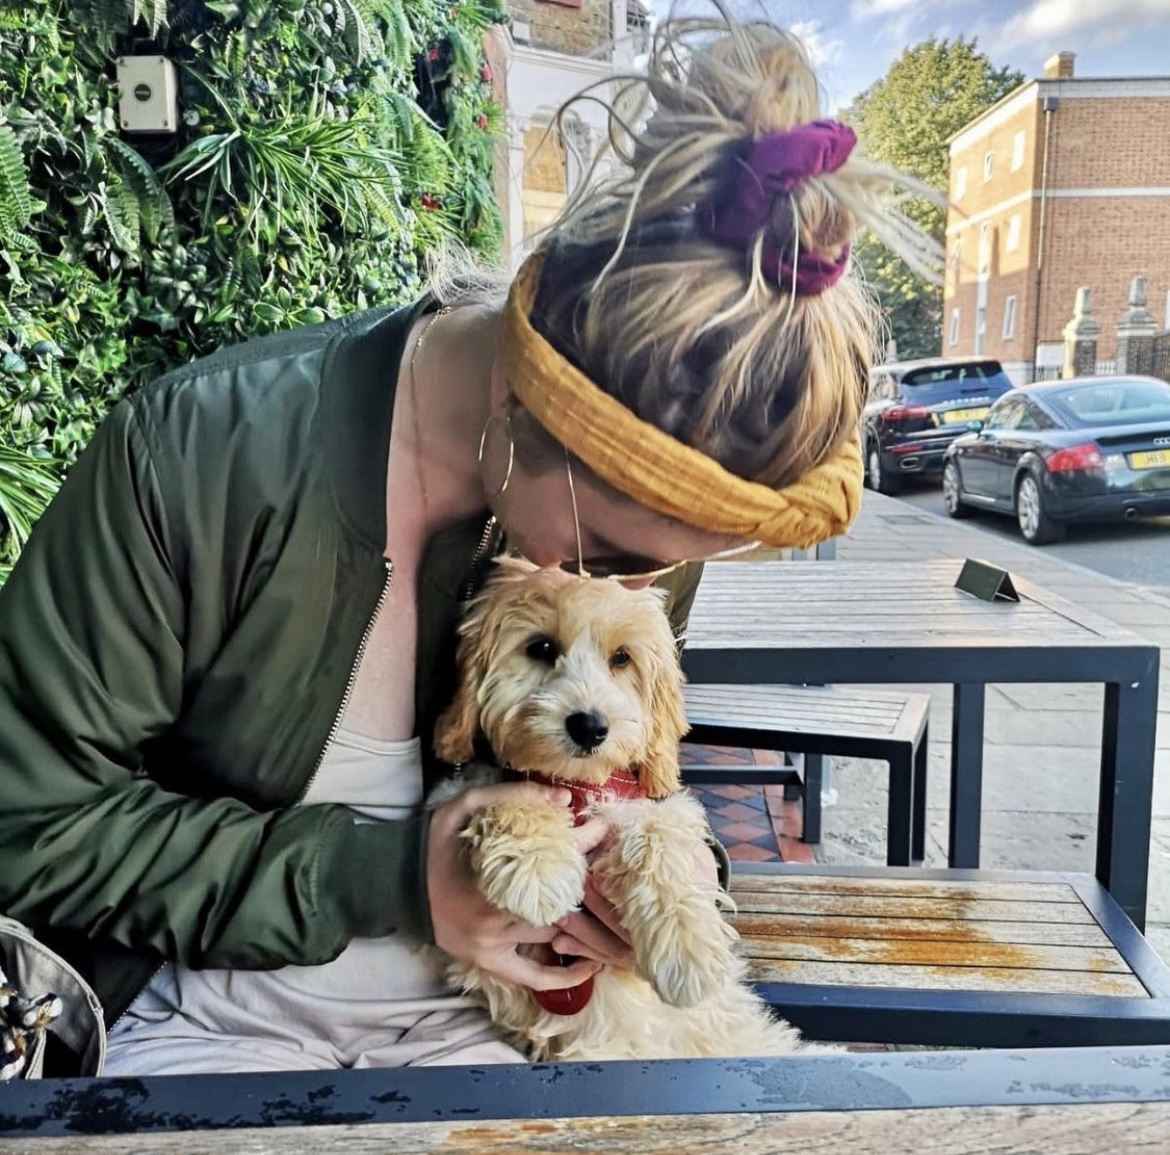 Happy Friday! Spend the day with your doggie in your favourite Greenwich Tavern. And don’t forget we have complimentary treats for them. 😉🐾 Photo credit: @ruwyatt